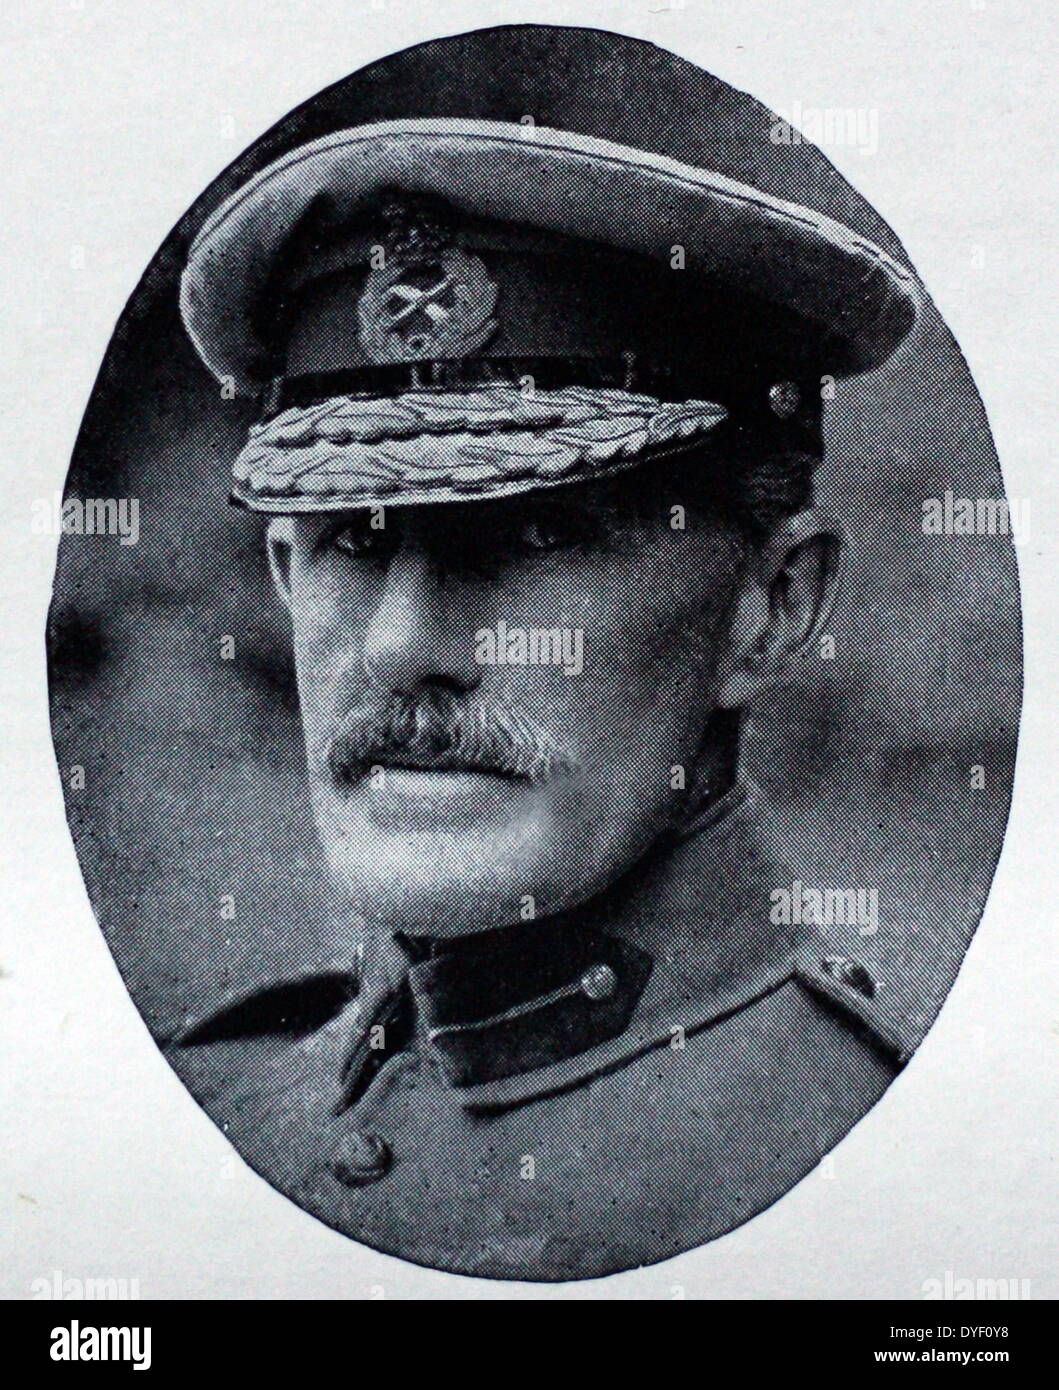 Photograph portrait of General Sir Ian Standish Monteith Hamilton. A British army officer who lived between 1853-1947. Commanded the Mediterranean Expeditionary Force in the Dardanelles during the Battle of Gallipoli, He also served in the First and Second Boer Wars, the Second Anglo-Afghan War, the Mahdist War, and the Russo-Japanese War. Photo taken circa 1914-1918. Stock Photo